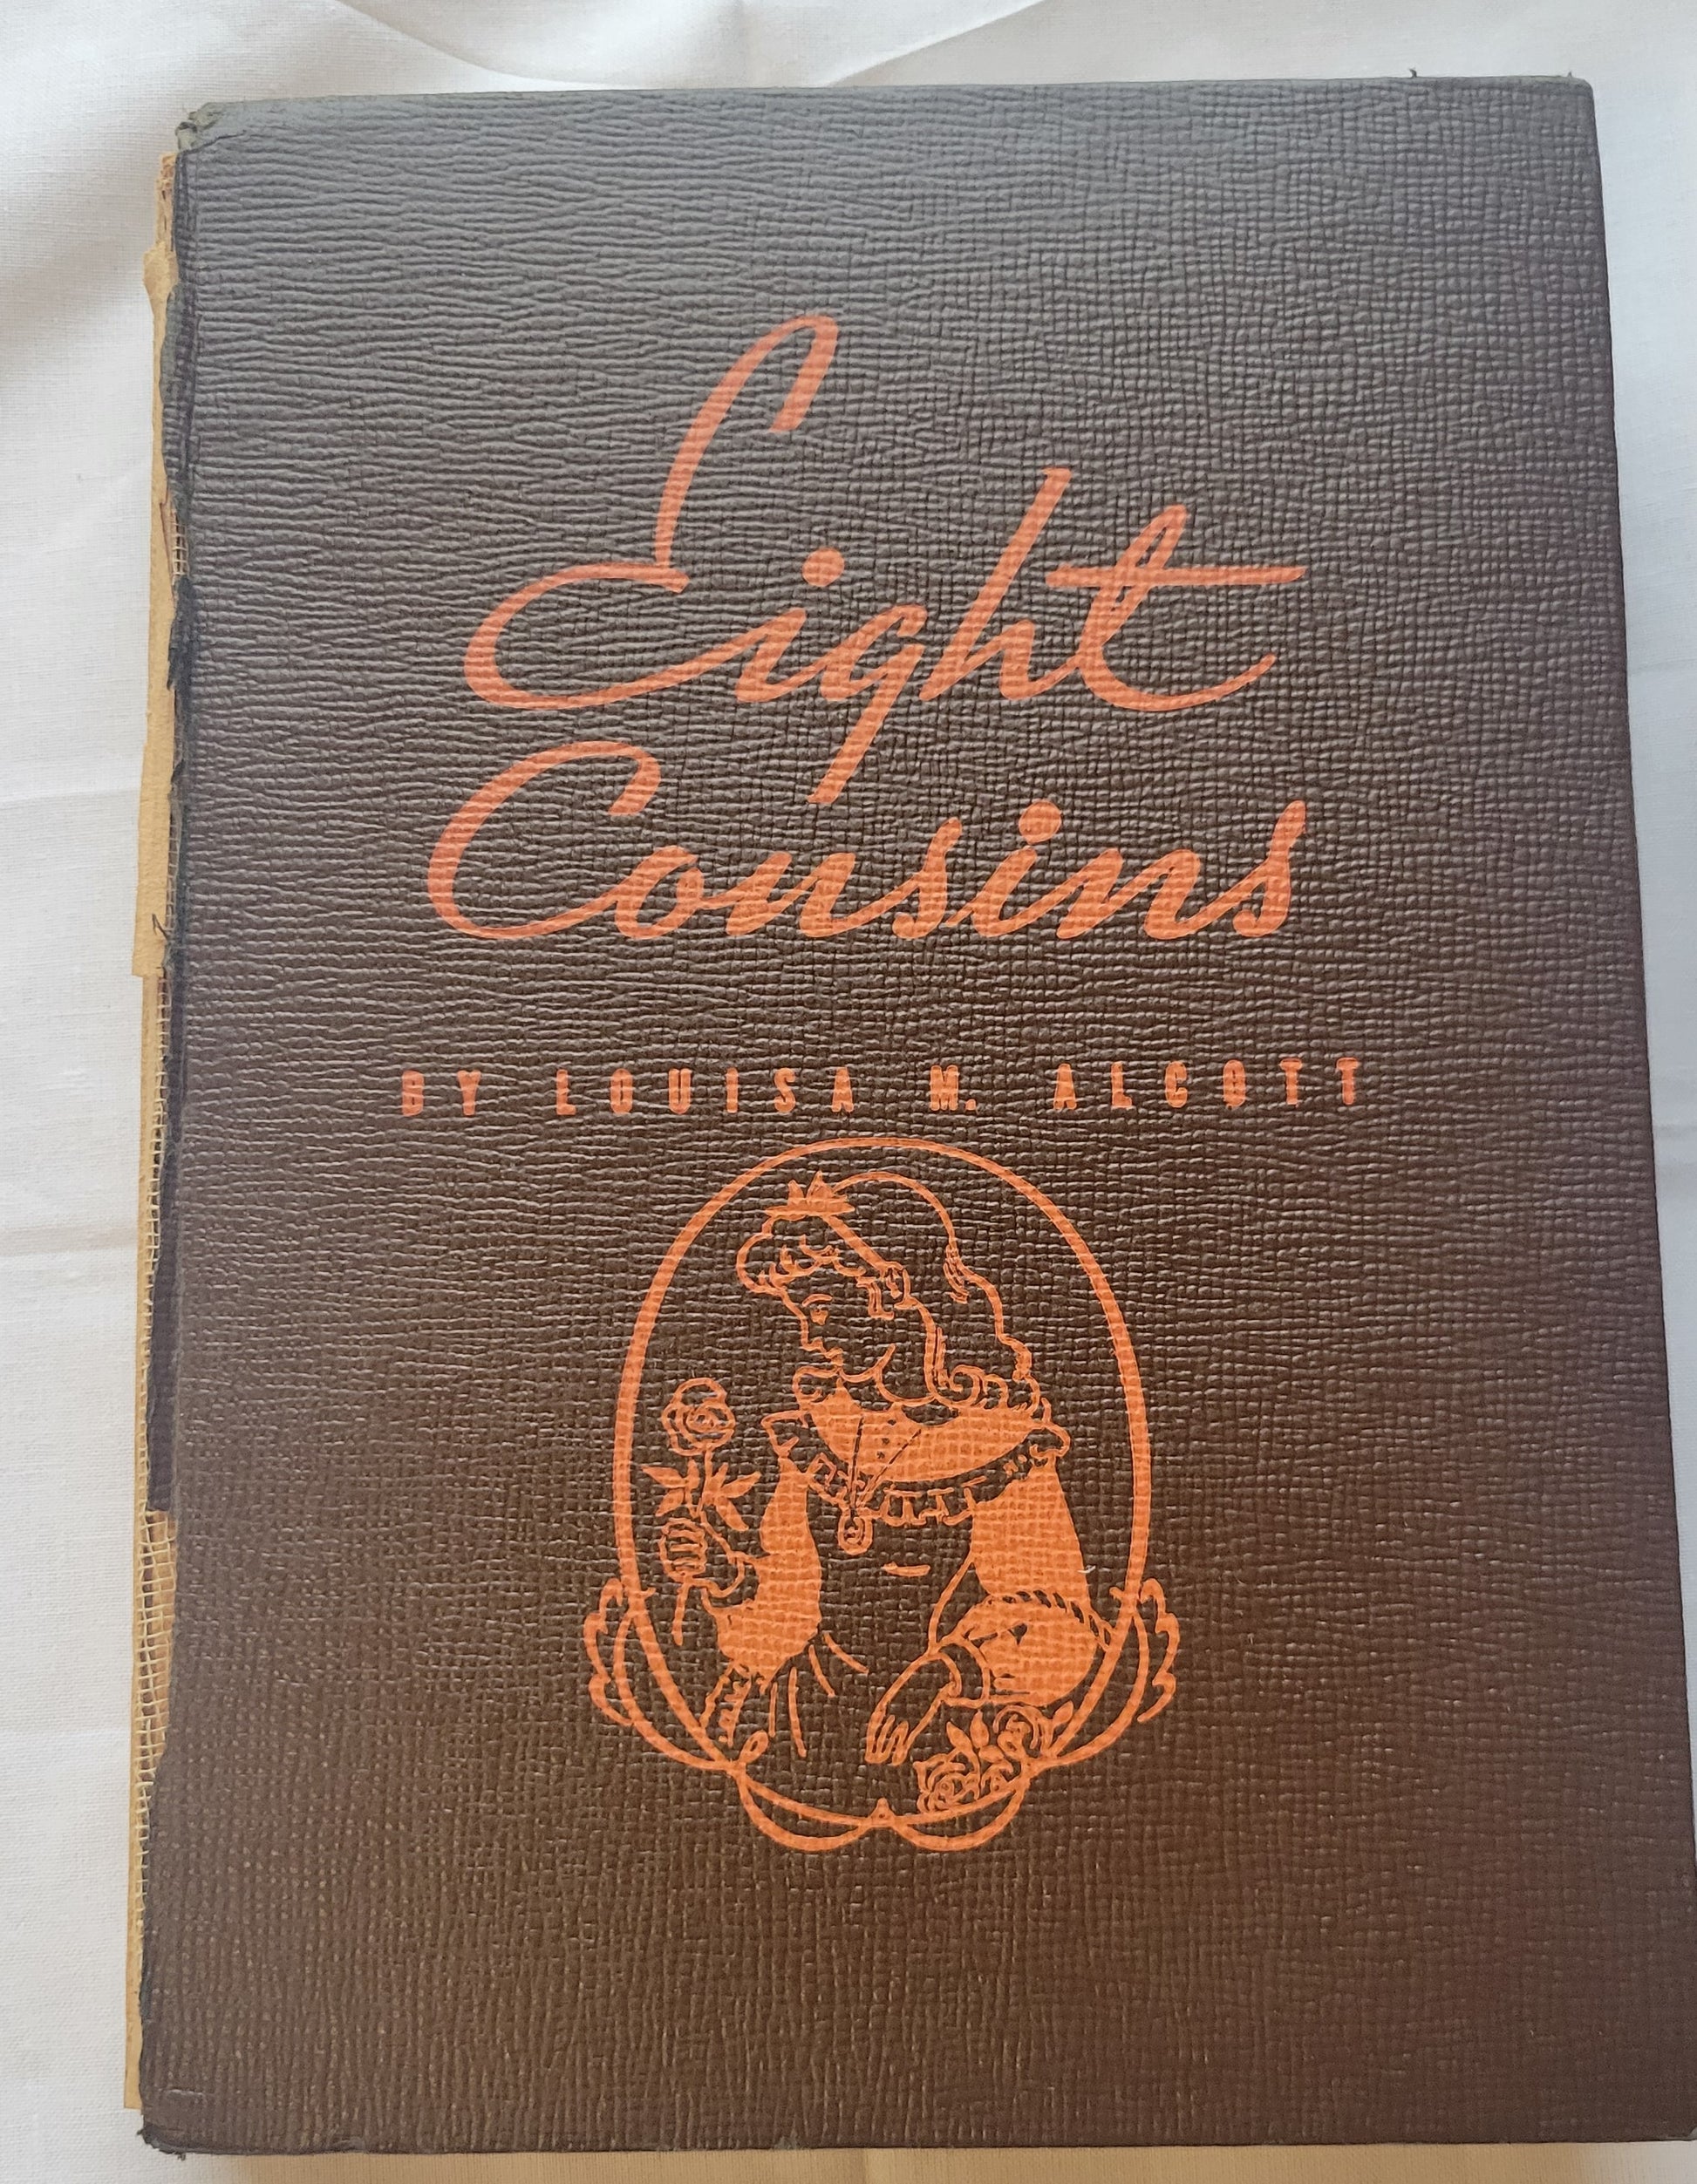 Vintage book "Eight Cousins" by Louisa May Alcott (author of Little Women), illustrated by Erwin L. Hess, and published by Whitman Publishing Company in 1940. View of front cover.